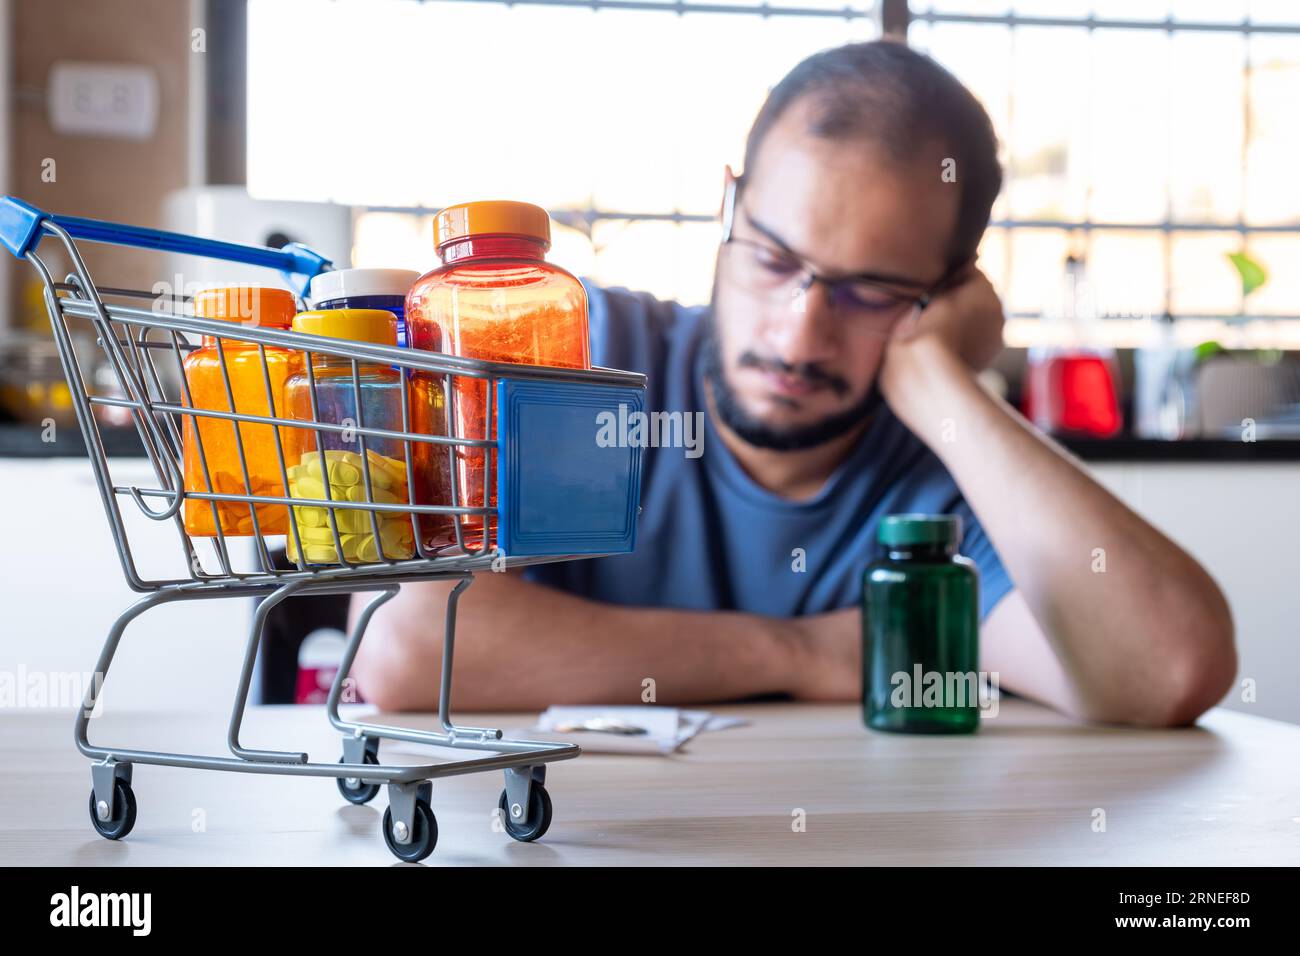 man sitting in the kitchen feeling frustrated due inflation and increase of daily needs supplies for house with shopping cart in front of him holding Stock Photo